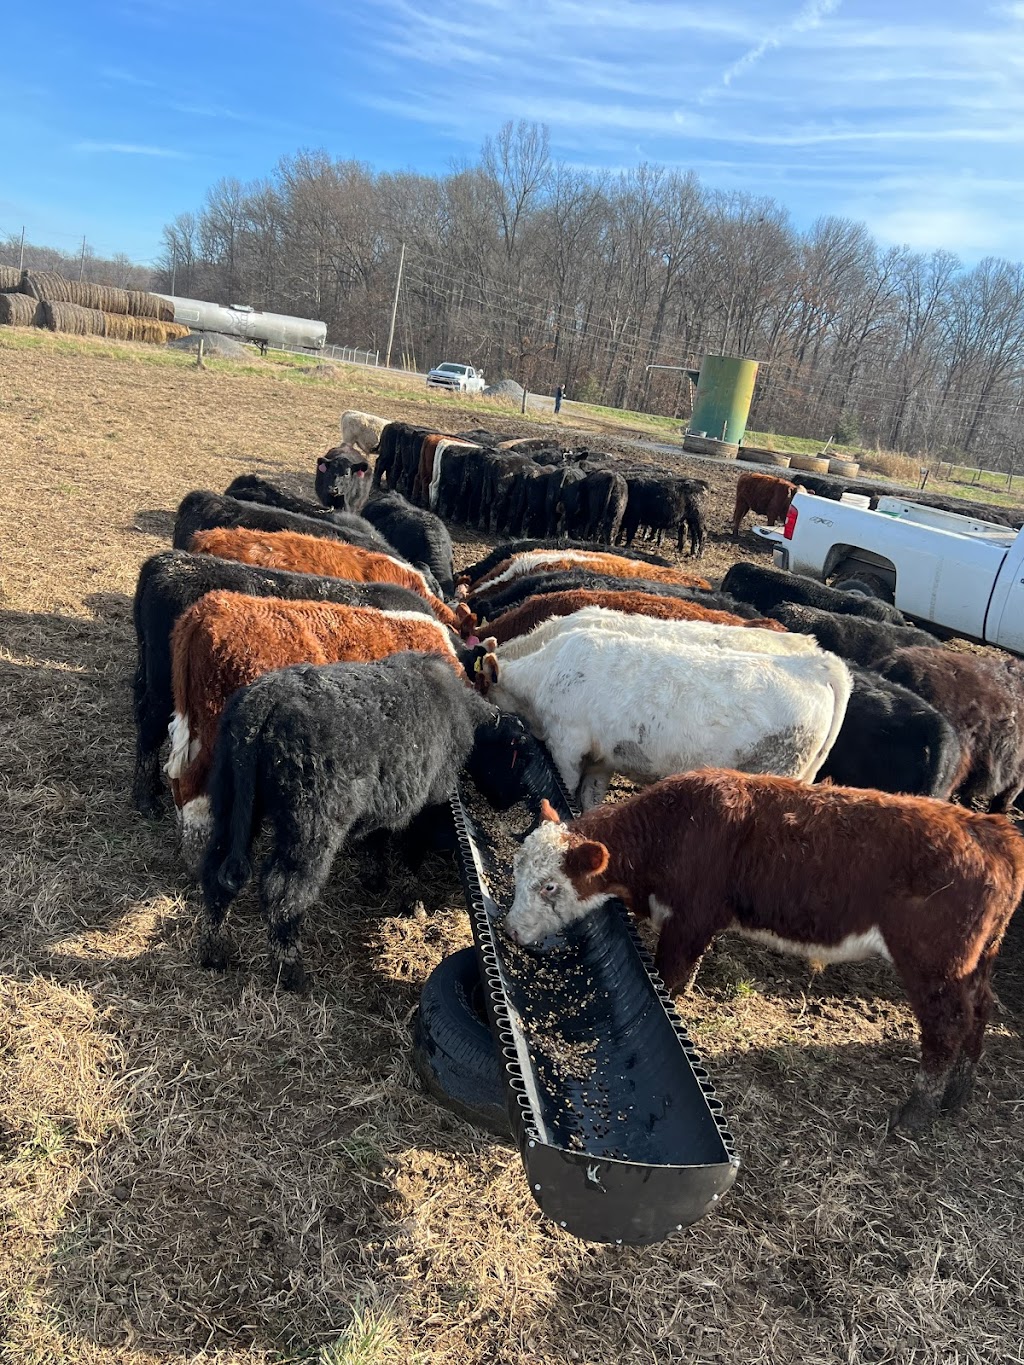 Smitty Feed Troughs | 945 Old Spurlington Rd, Campbellsville, KY 42718, USA | Phone: (270) 789-8108